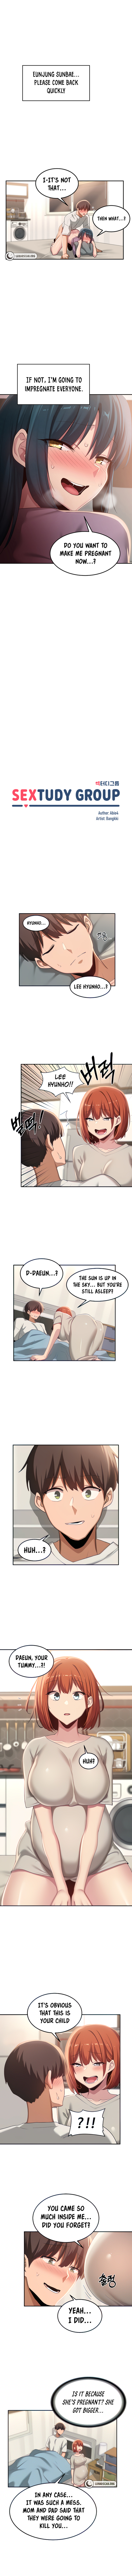 Panel Image 1 for chapter 100 of manhwa Sex Study Group on read.oppai.stream